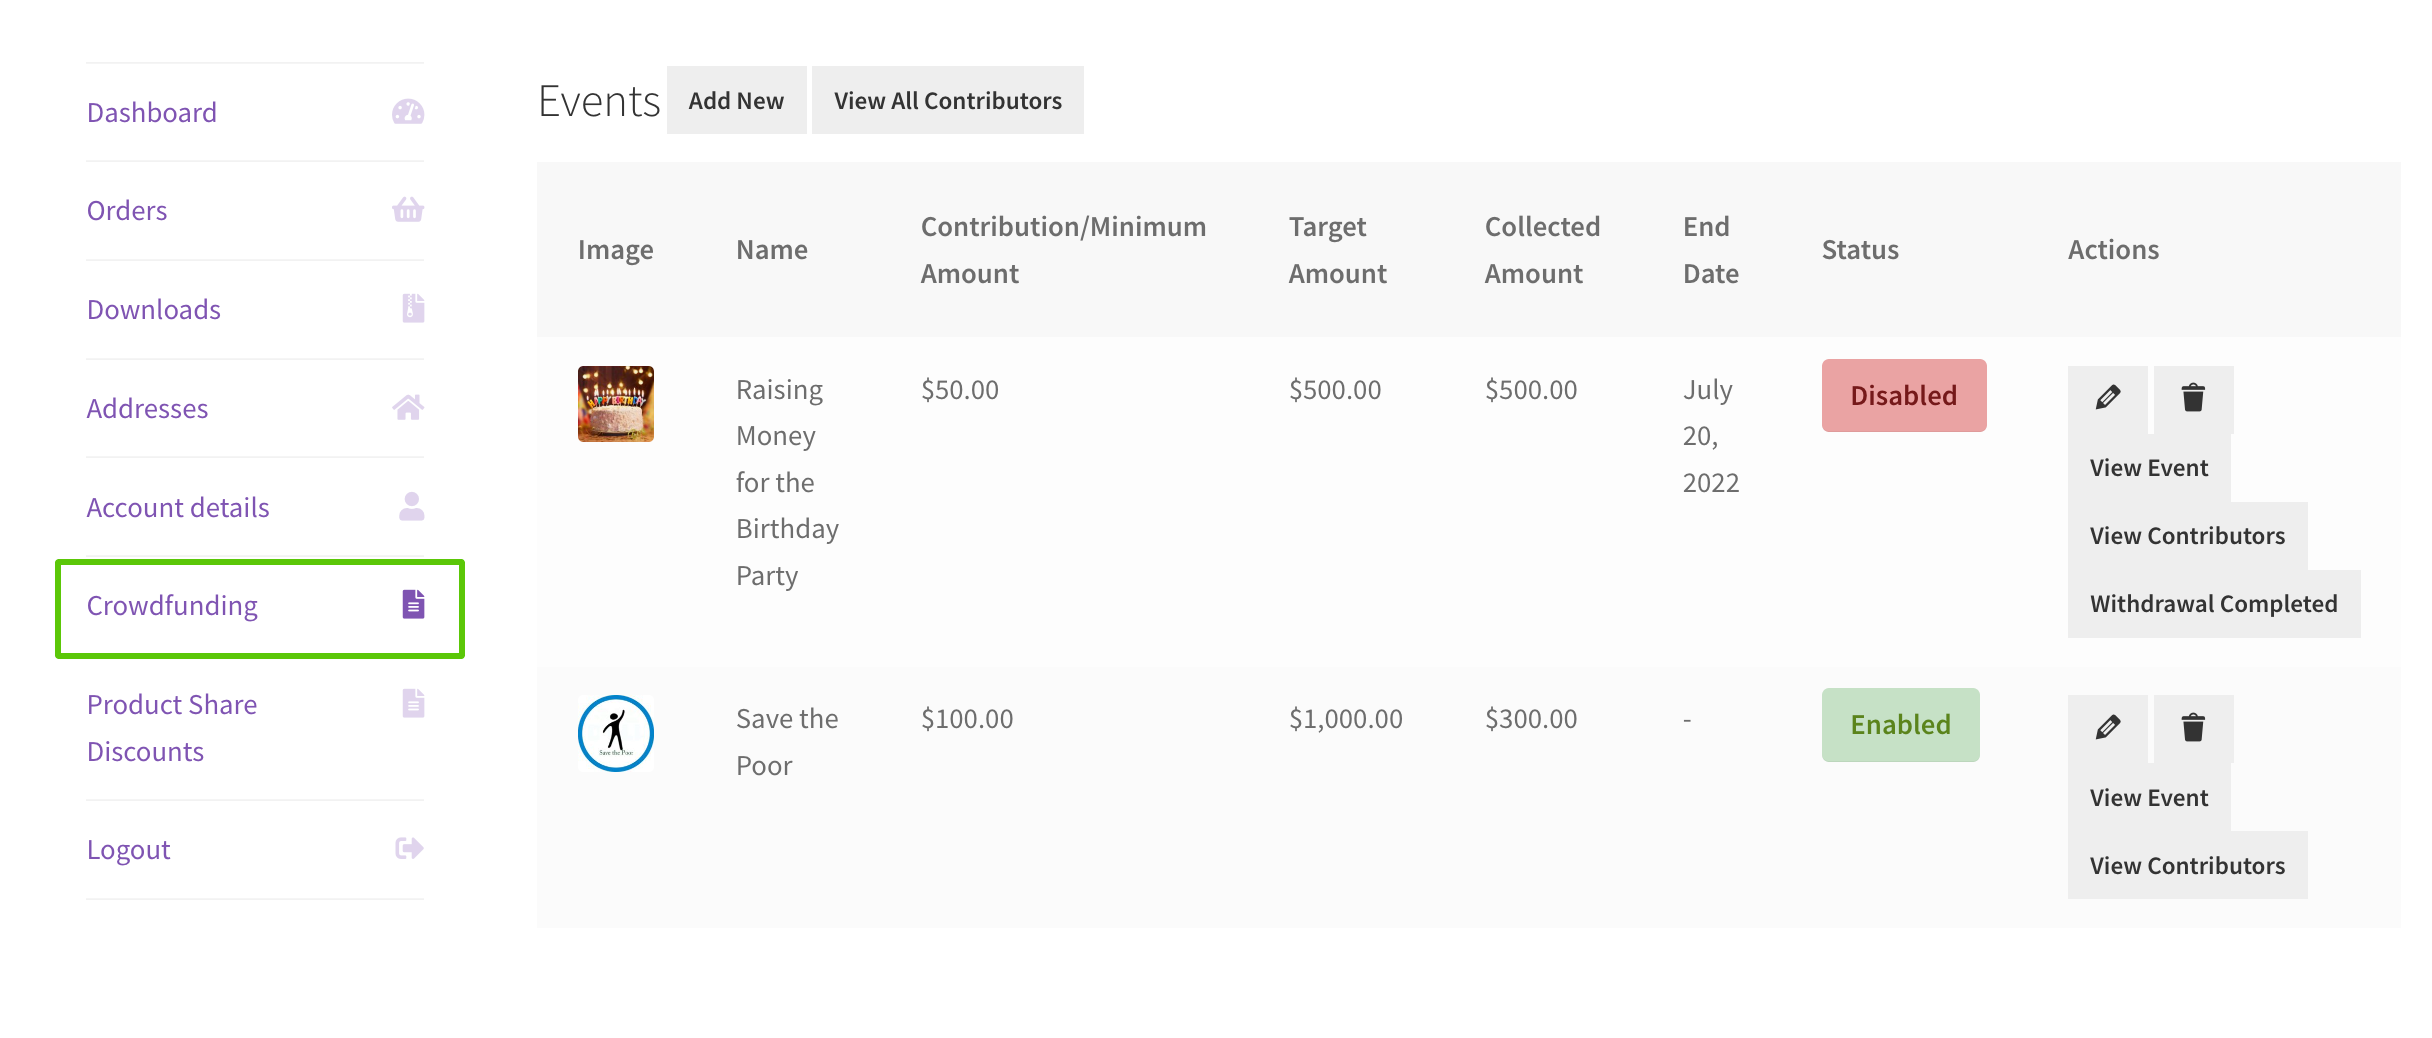 WooCommerce Crowdfunding my accounts page events list